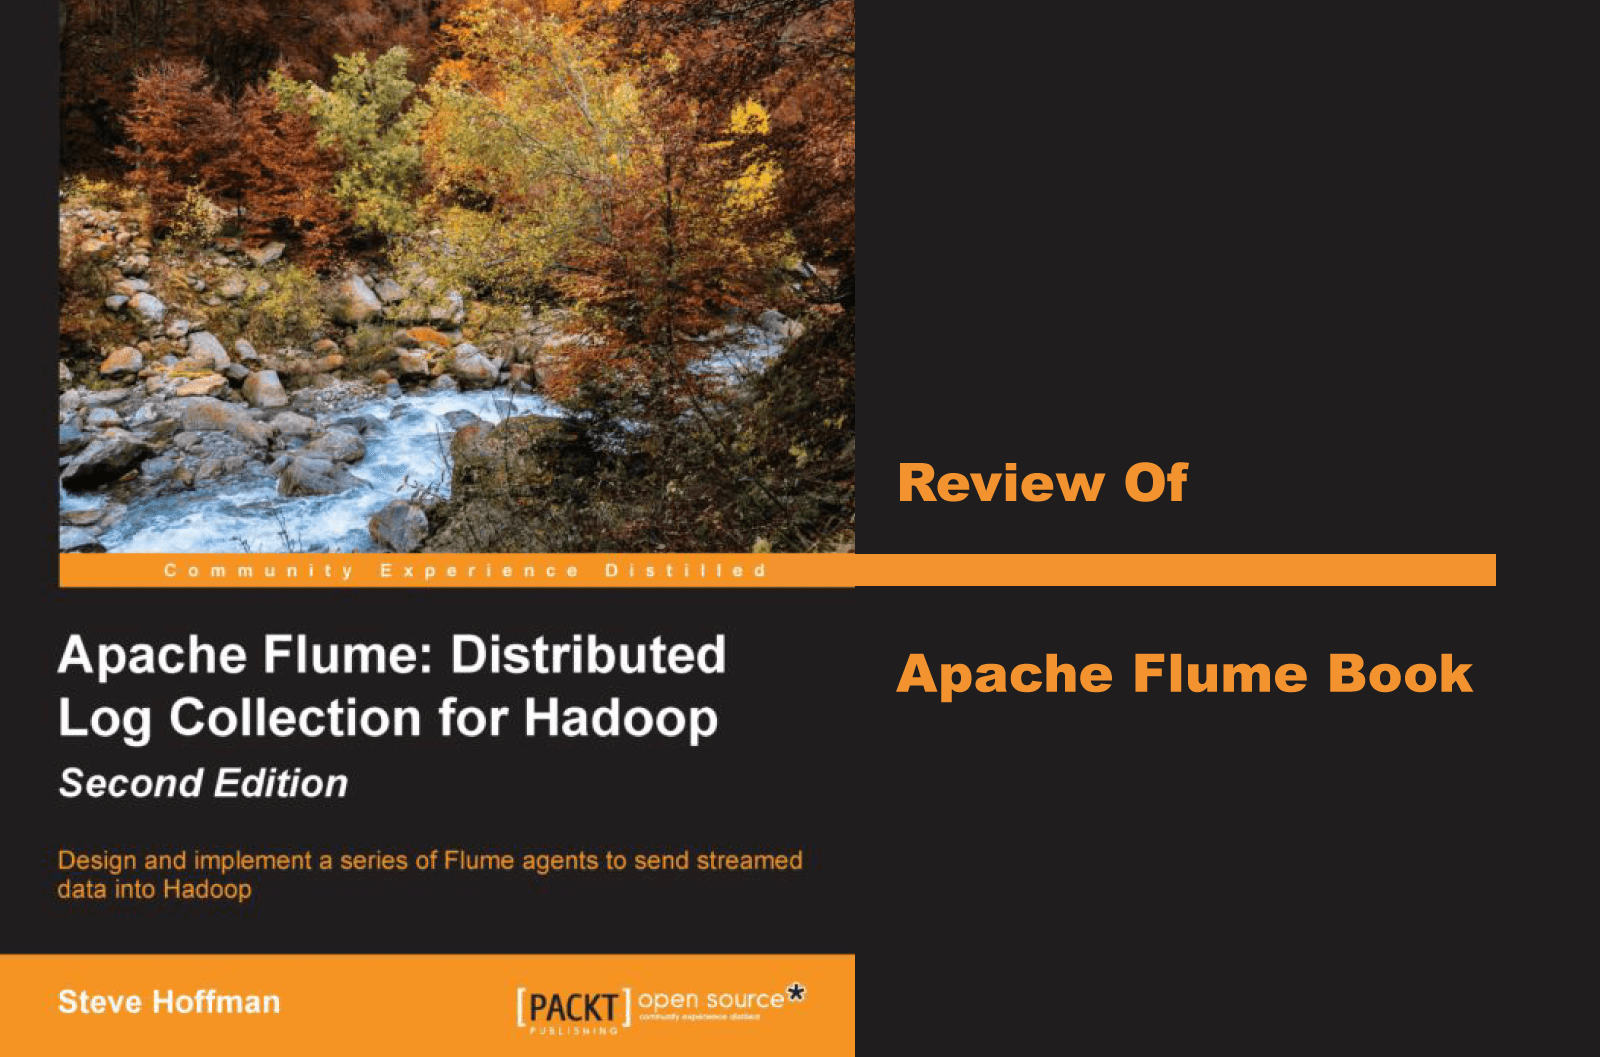 Review of Apache Flume book (Packt), second edition